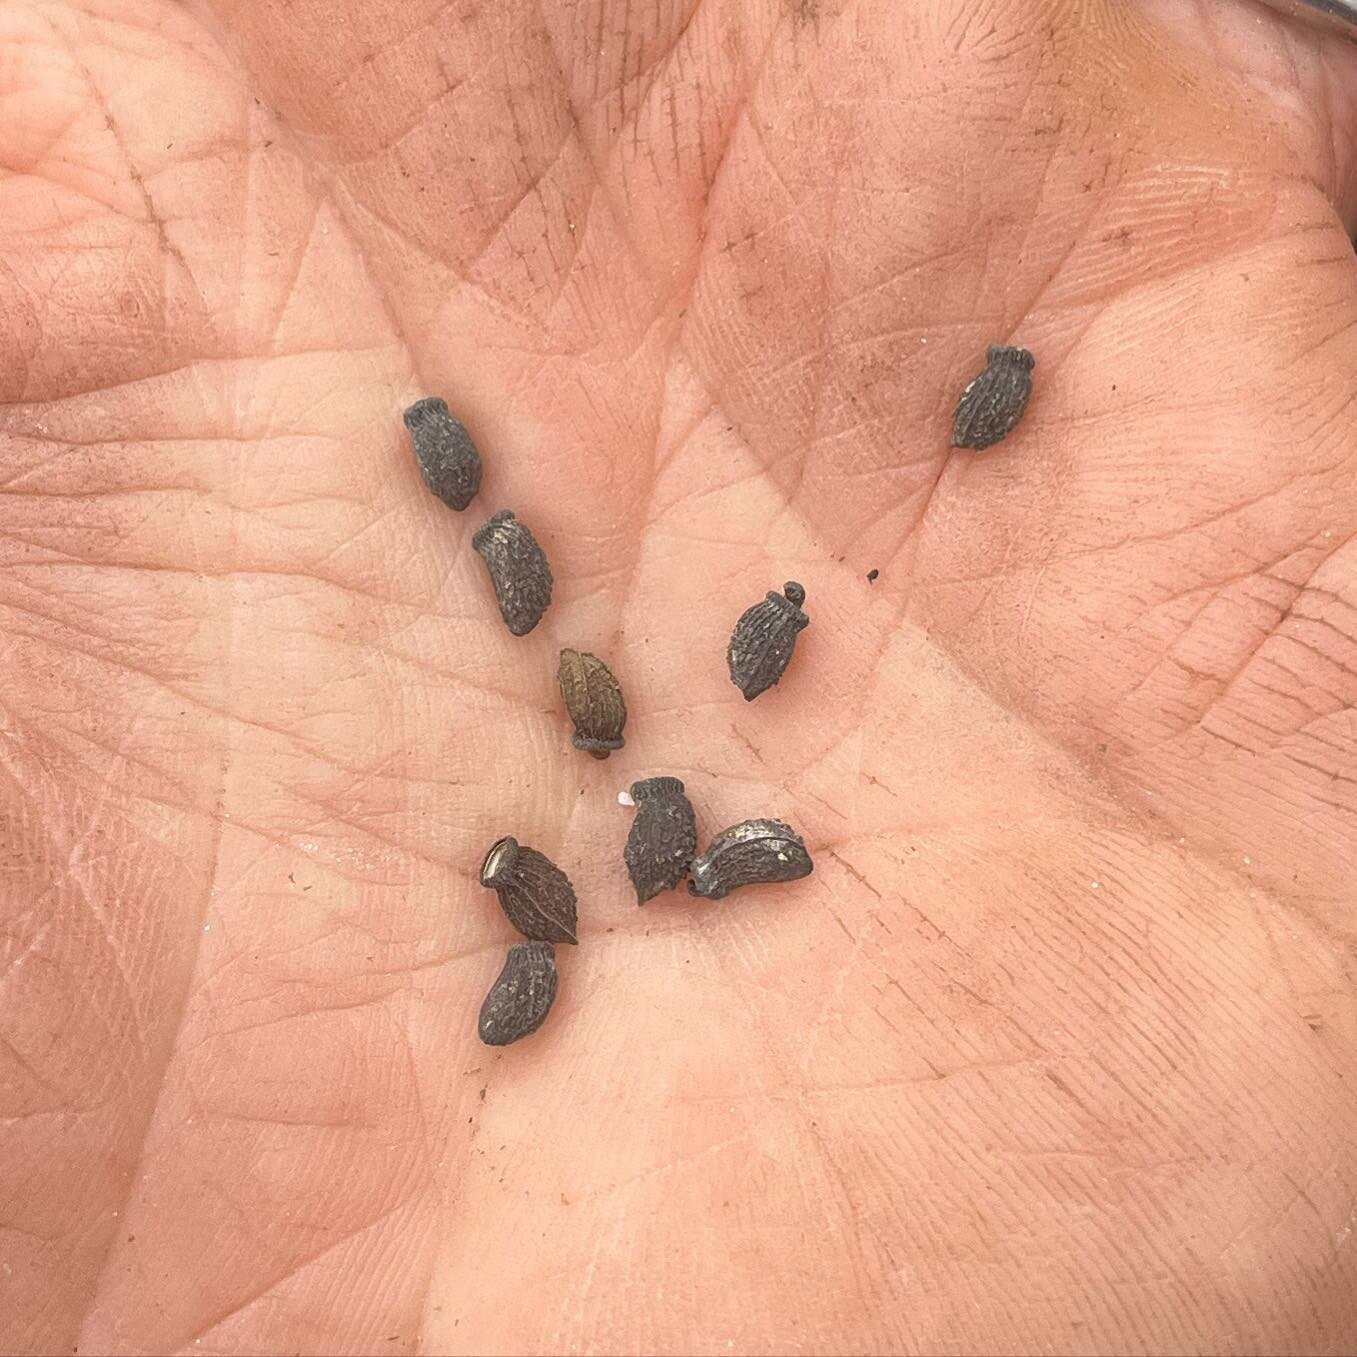 It&rsquo;s everyone&rsquo;s favorite springtime greenhouse game, &ldquo;What the heck kind of seed is that!?&rdquo; #stonesthrowfarm #communitysupportedagriculture